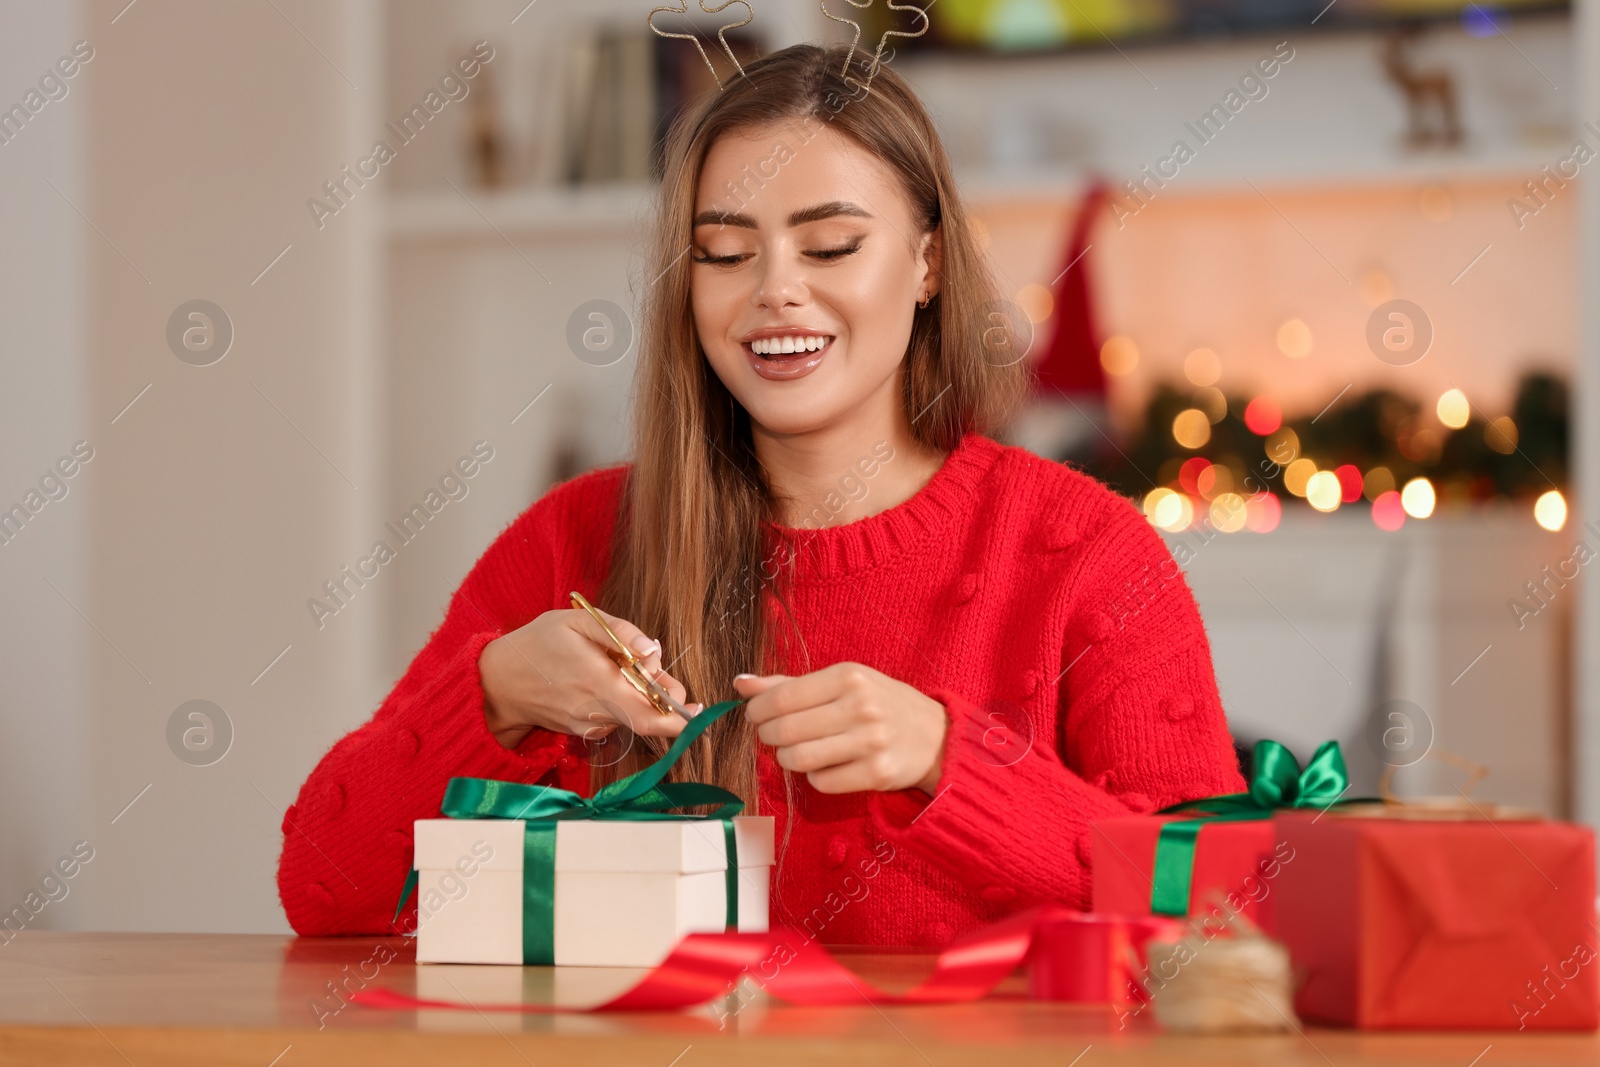 Photo of Beautiful young woman cutting ribbon. Decorating Christmas gift at table indoors